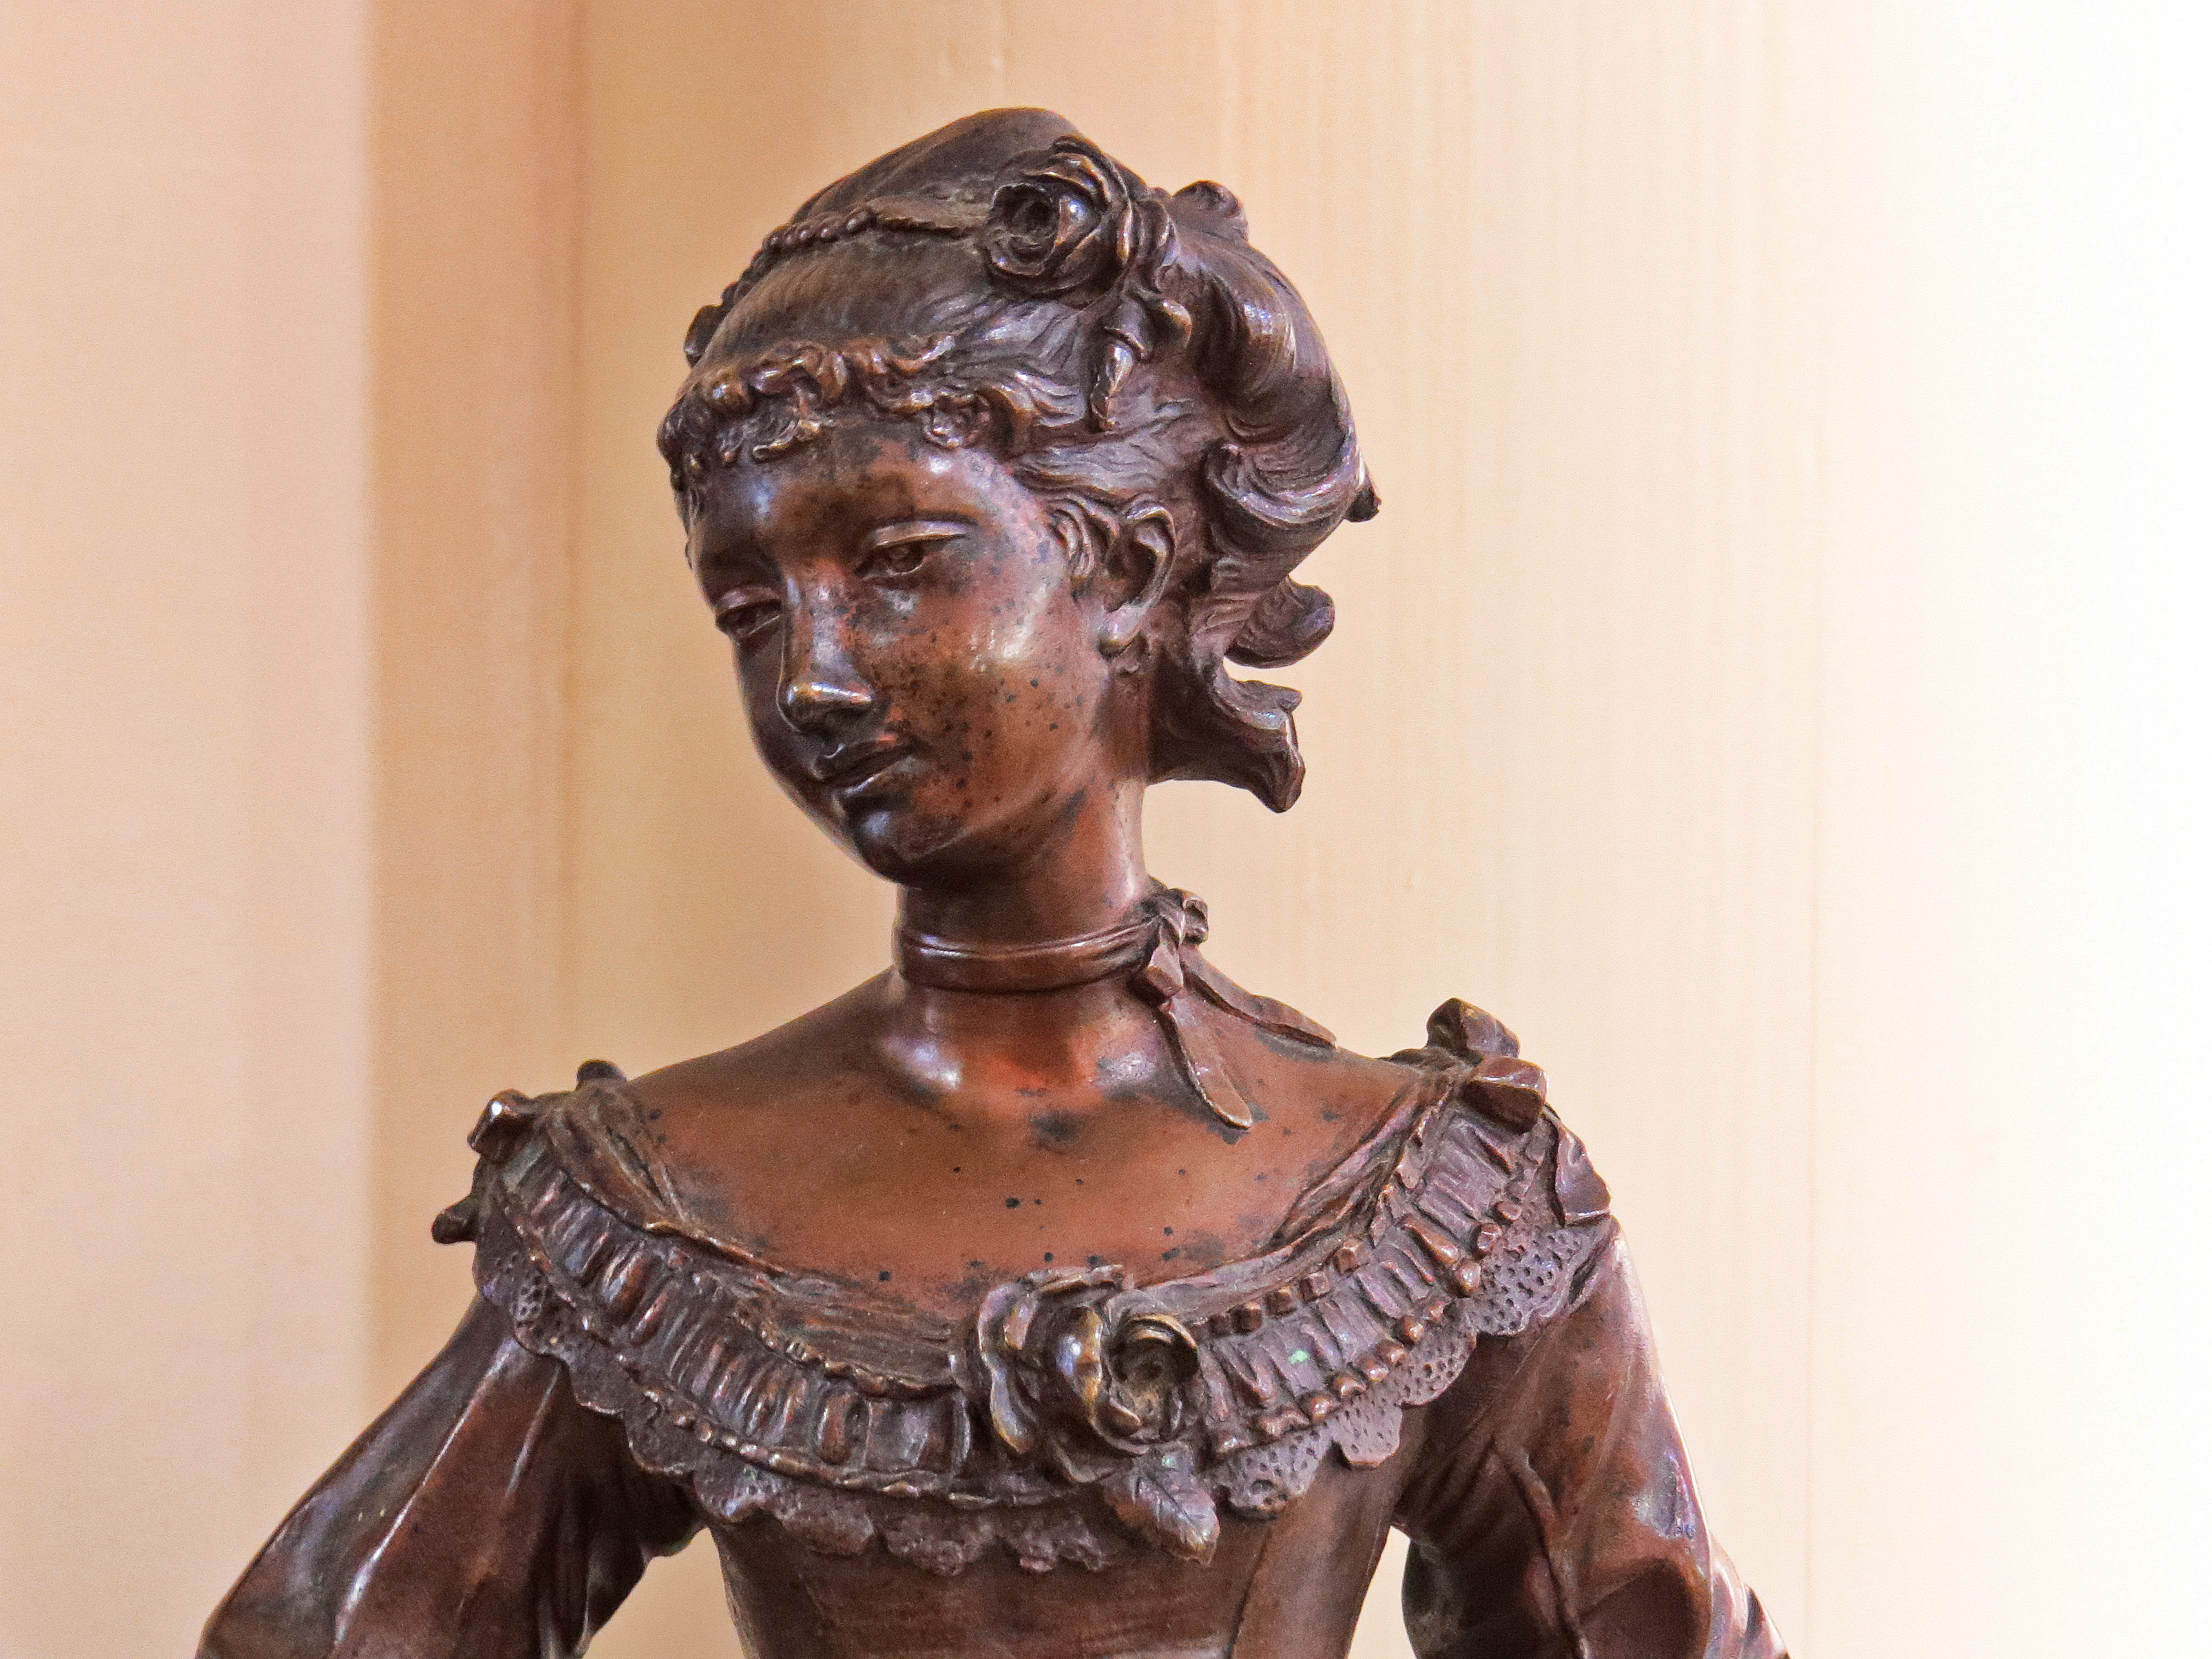 French Bronze Sculpture of a Female Figure in a Gown; Signed Gaudez Hors Concours